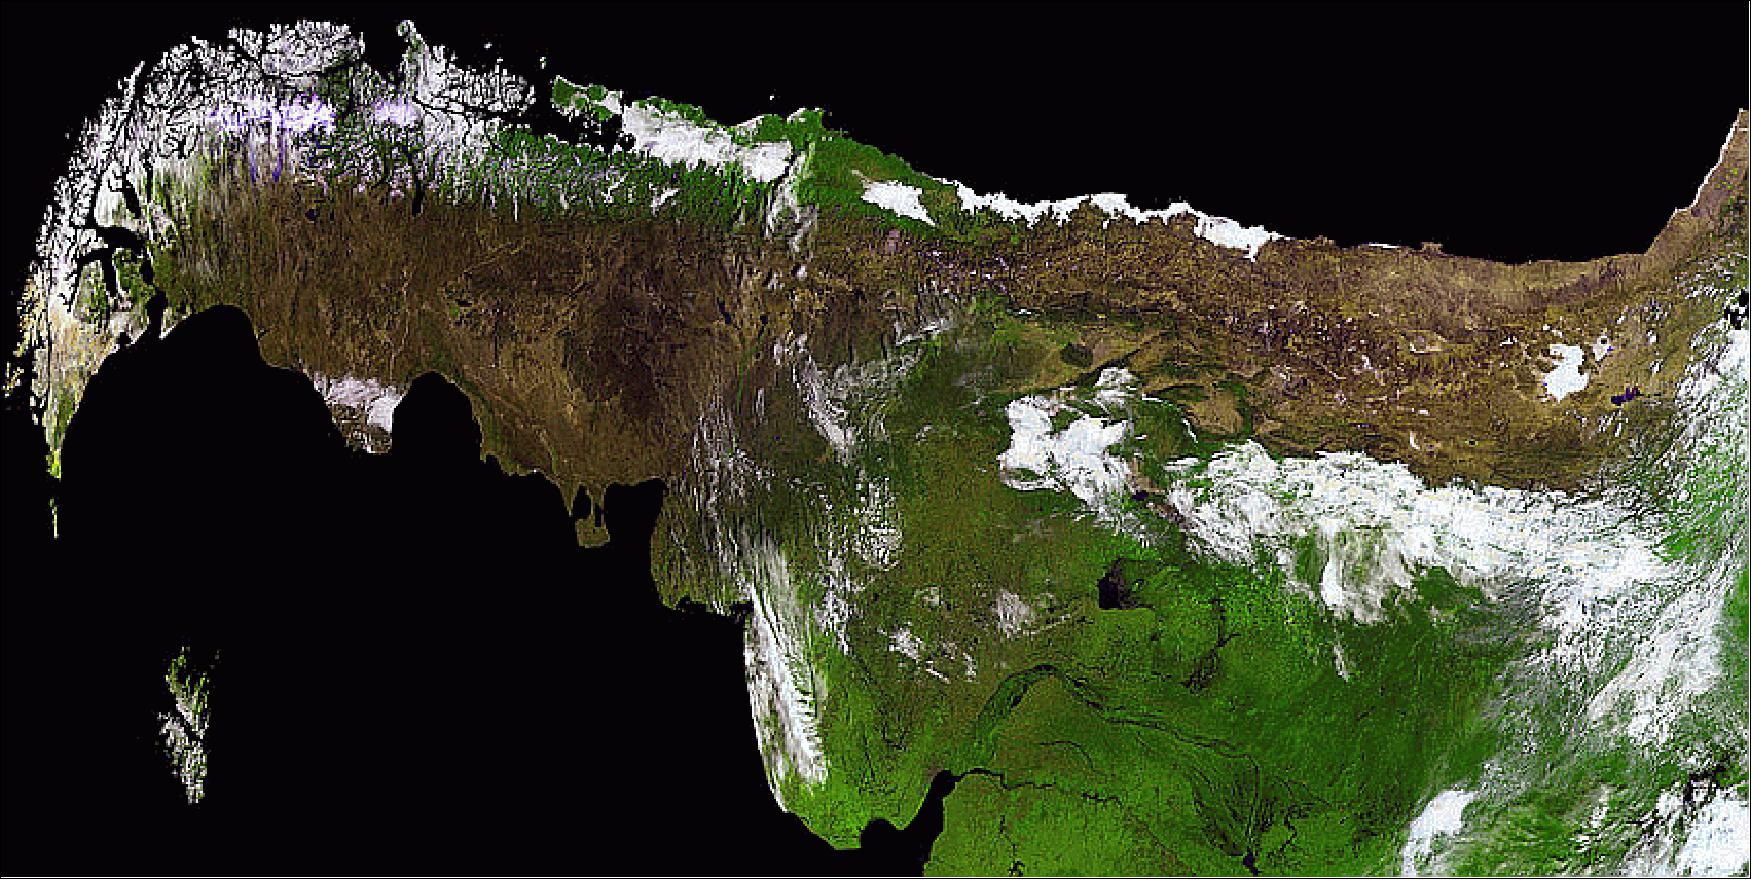 Figure 60: An unusual view of South America and the Andes mountains, acquired by PROBA-V on April 23, 2014 (image credit: ESA, VITO)